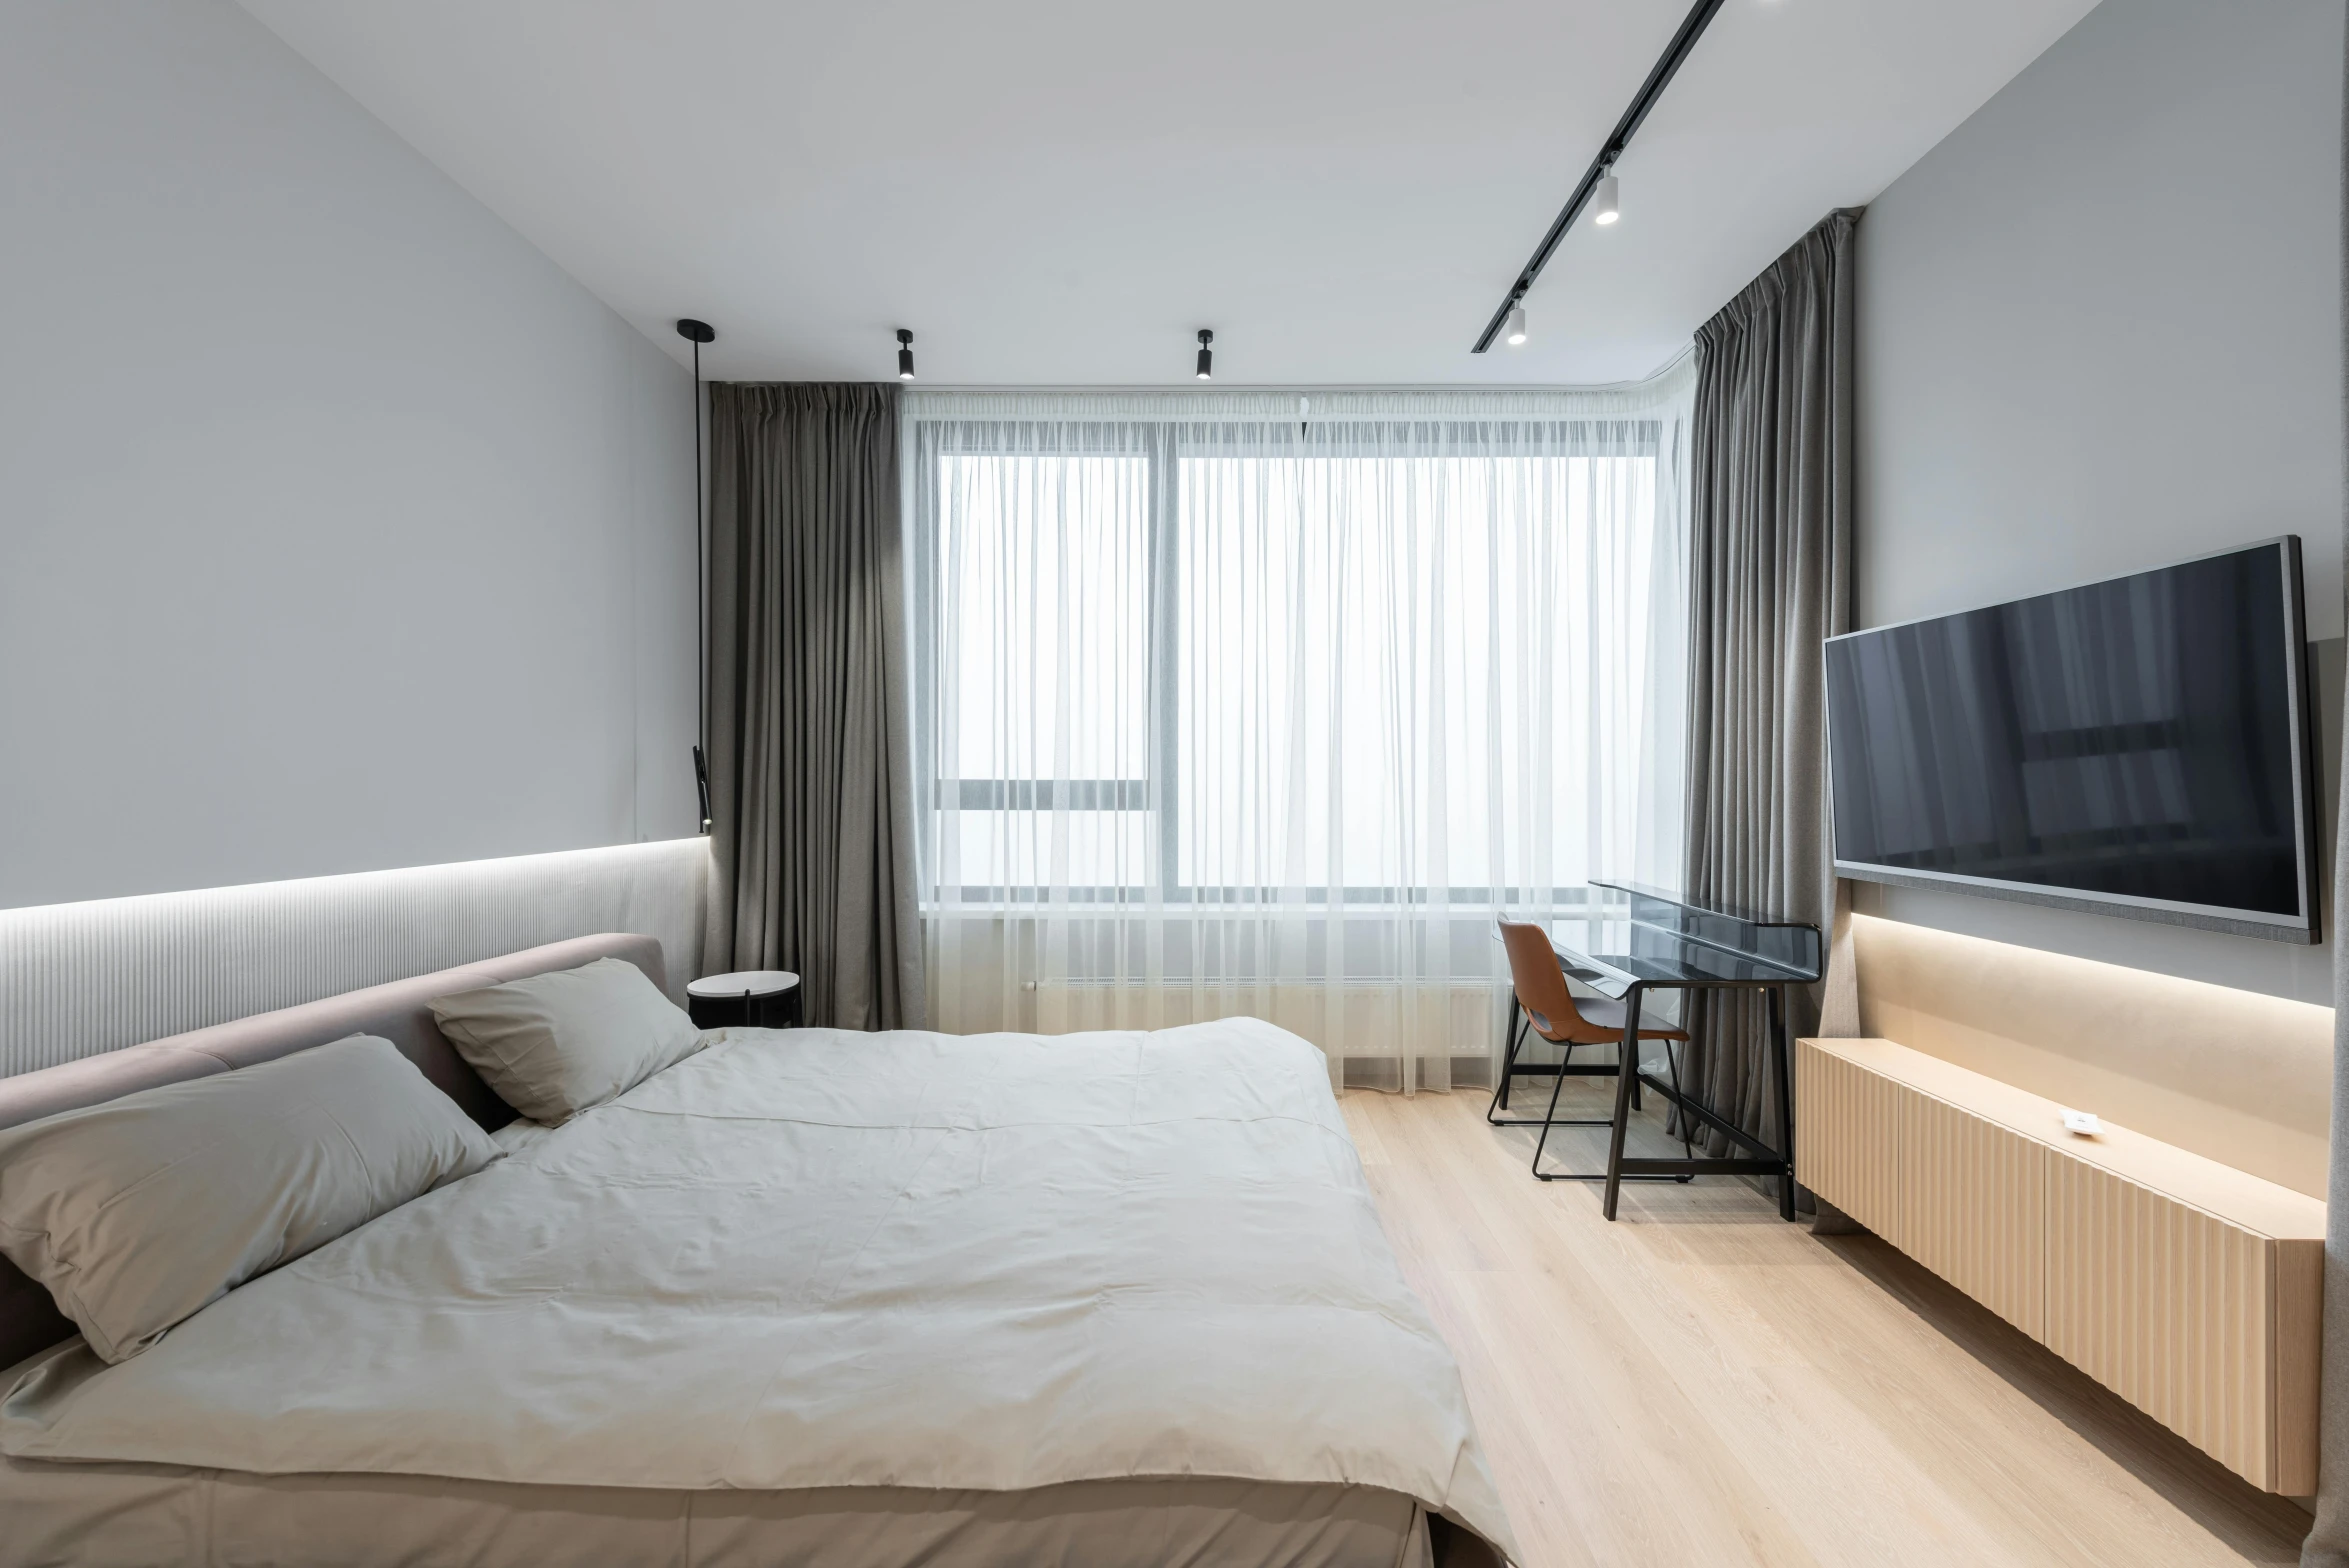 a bed room with a neatly made bed and a flat screen tv, by Adam Marczyński, light and space, grey, thumbnail, floor to ceiling window, scandinavian